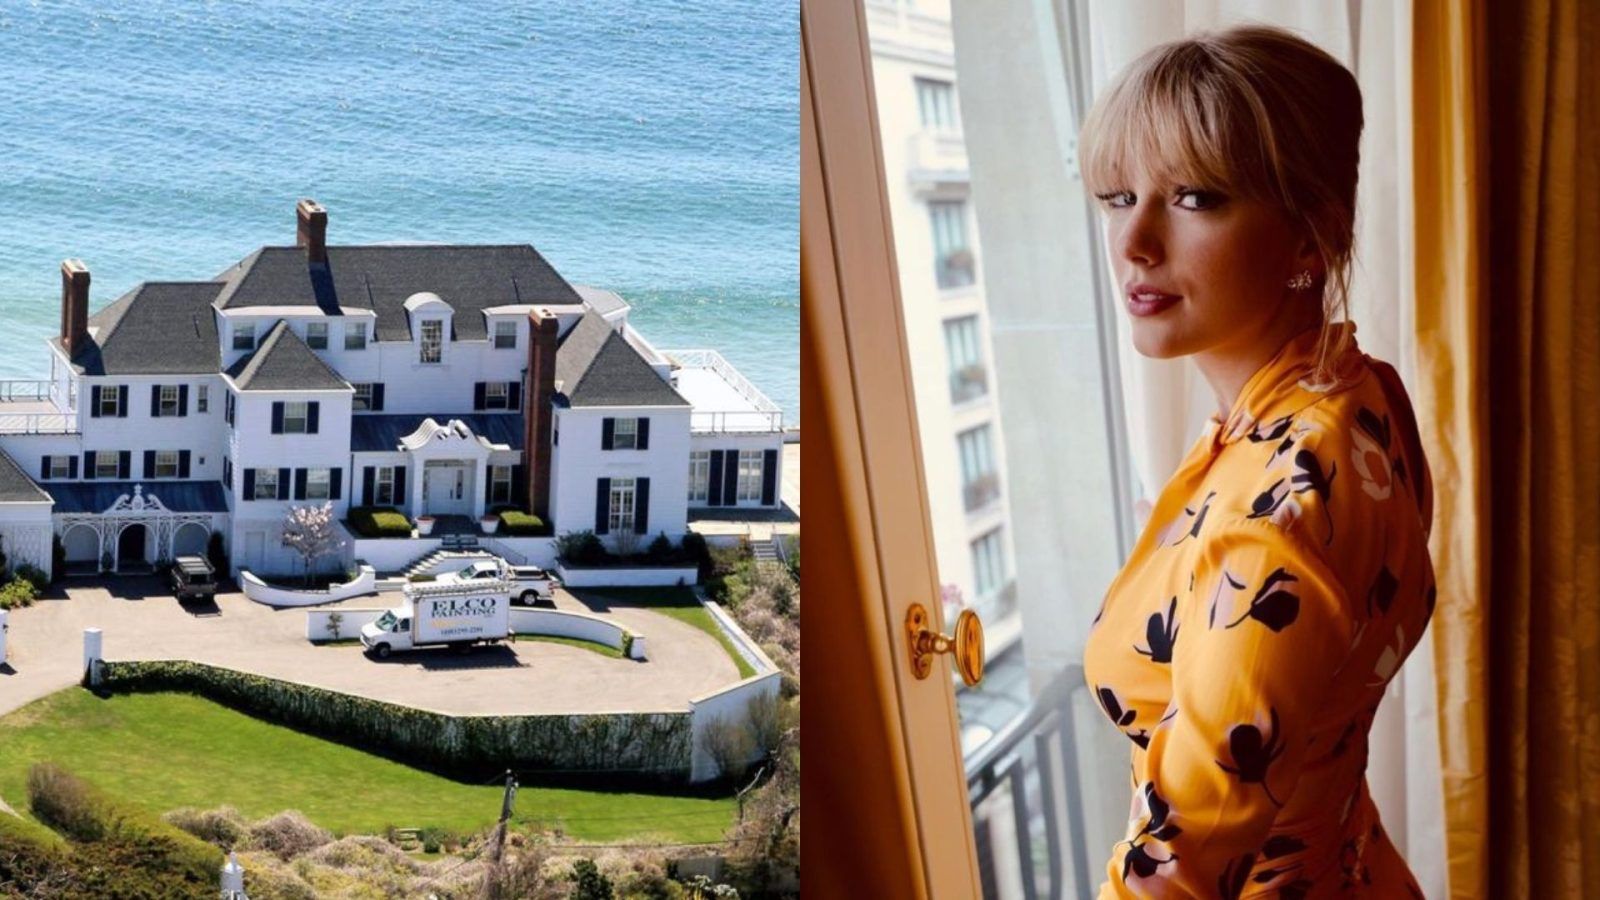 Taylor Swift’s Homes: All Her Multi-Million Dollar Properties, Their Prices and Other Details